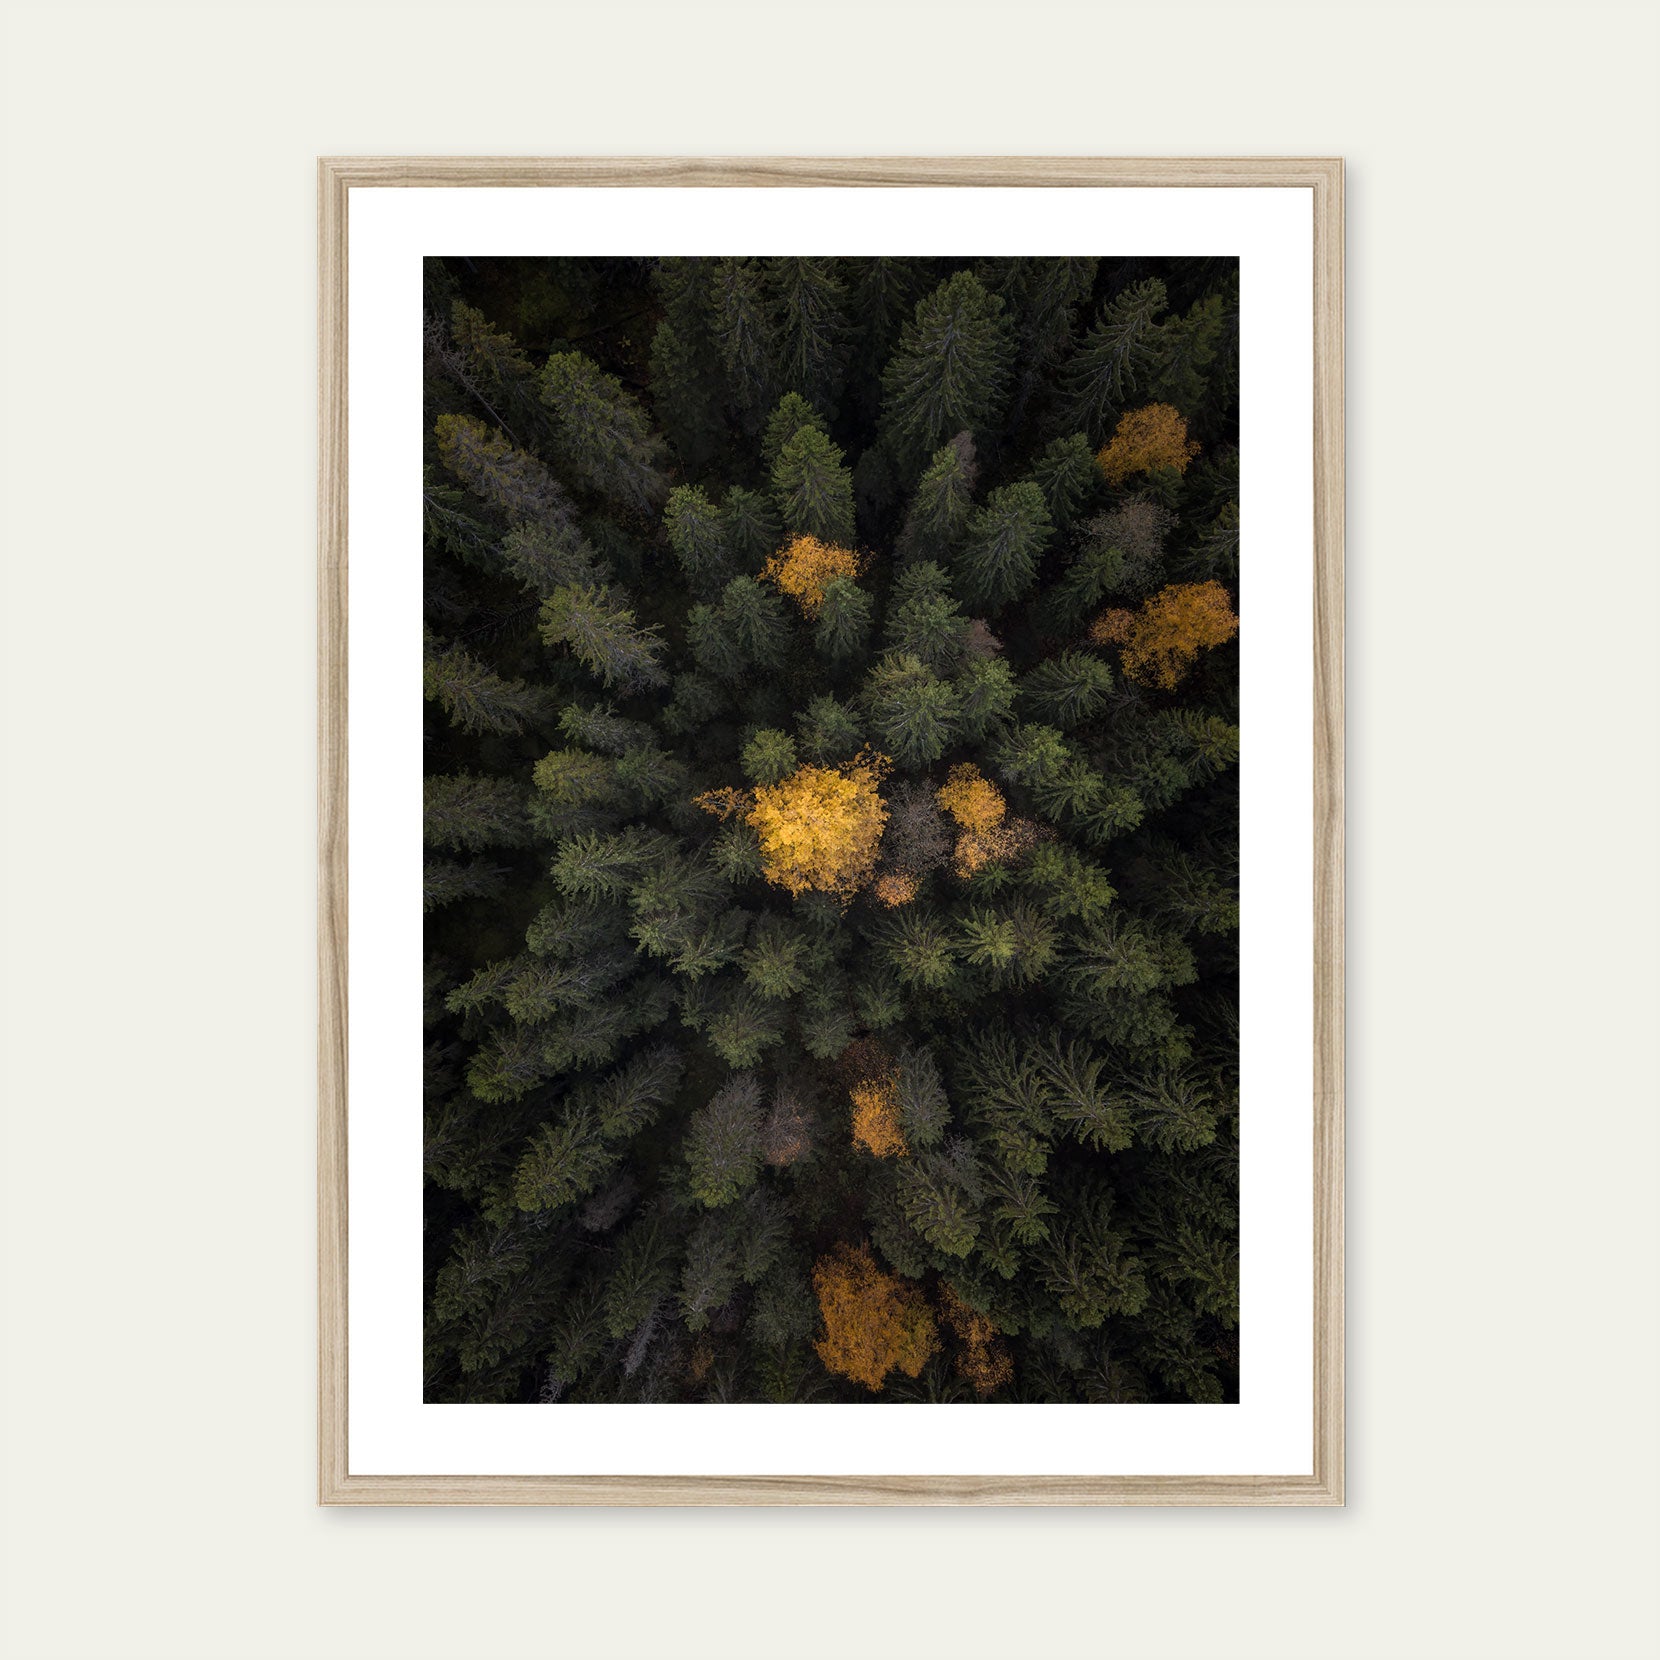 A wood framed print of a forest from above